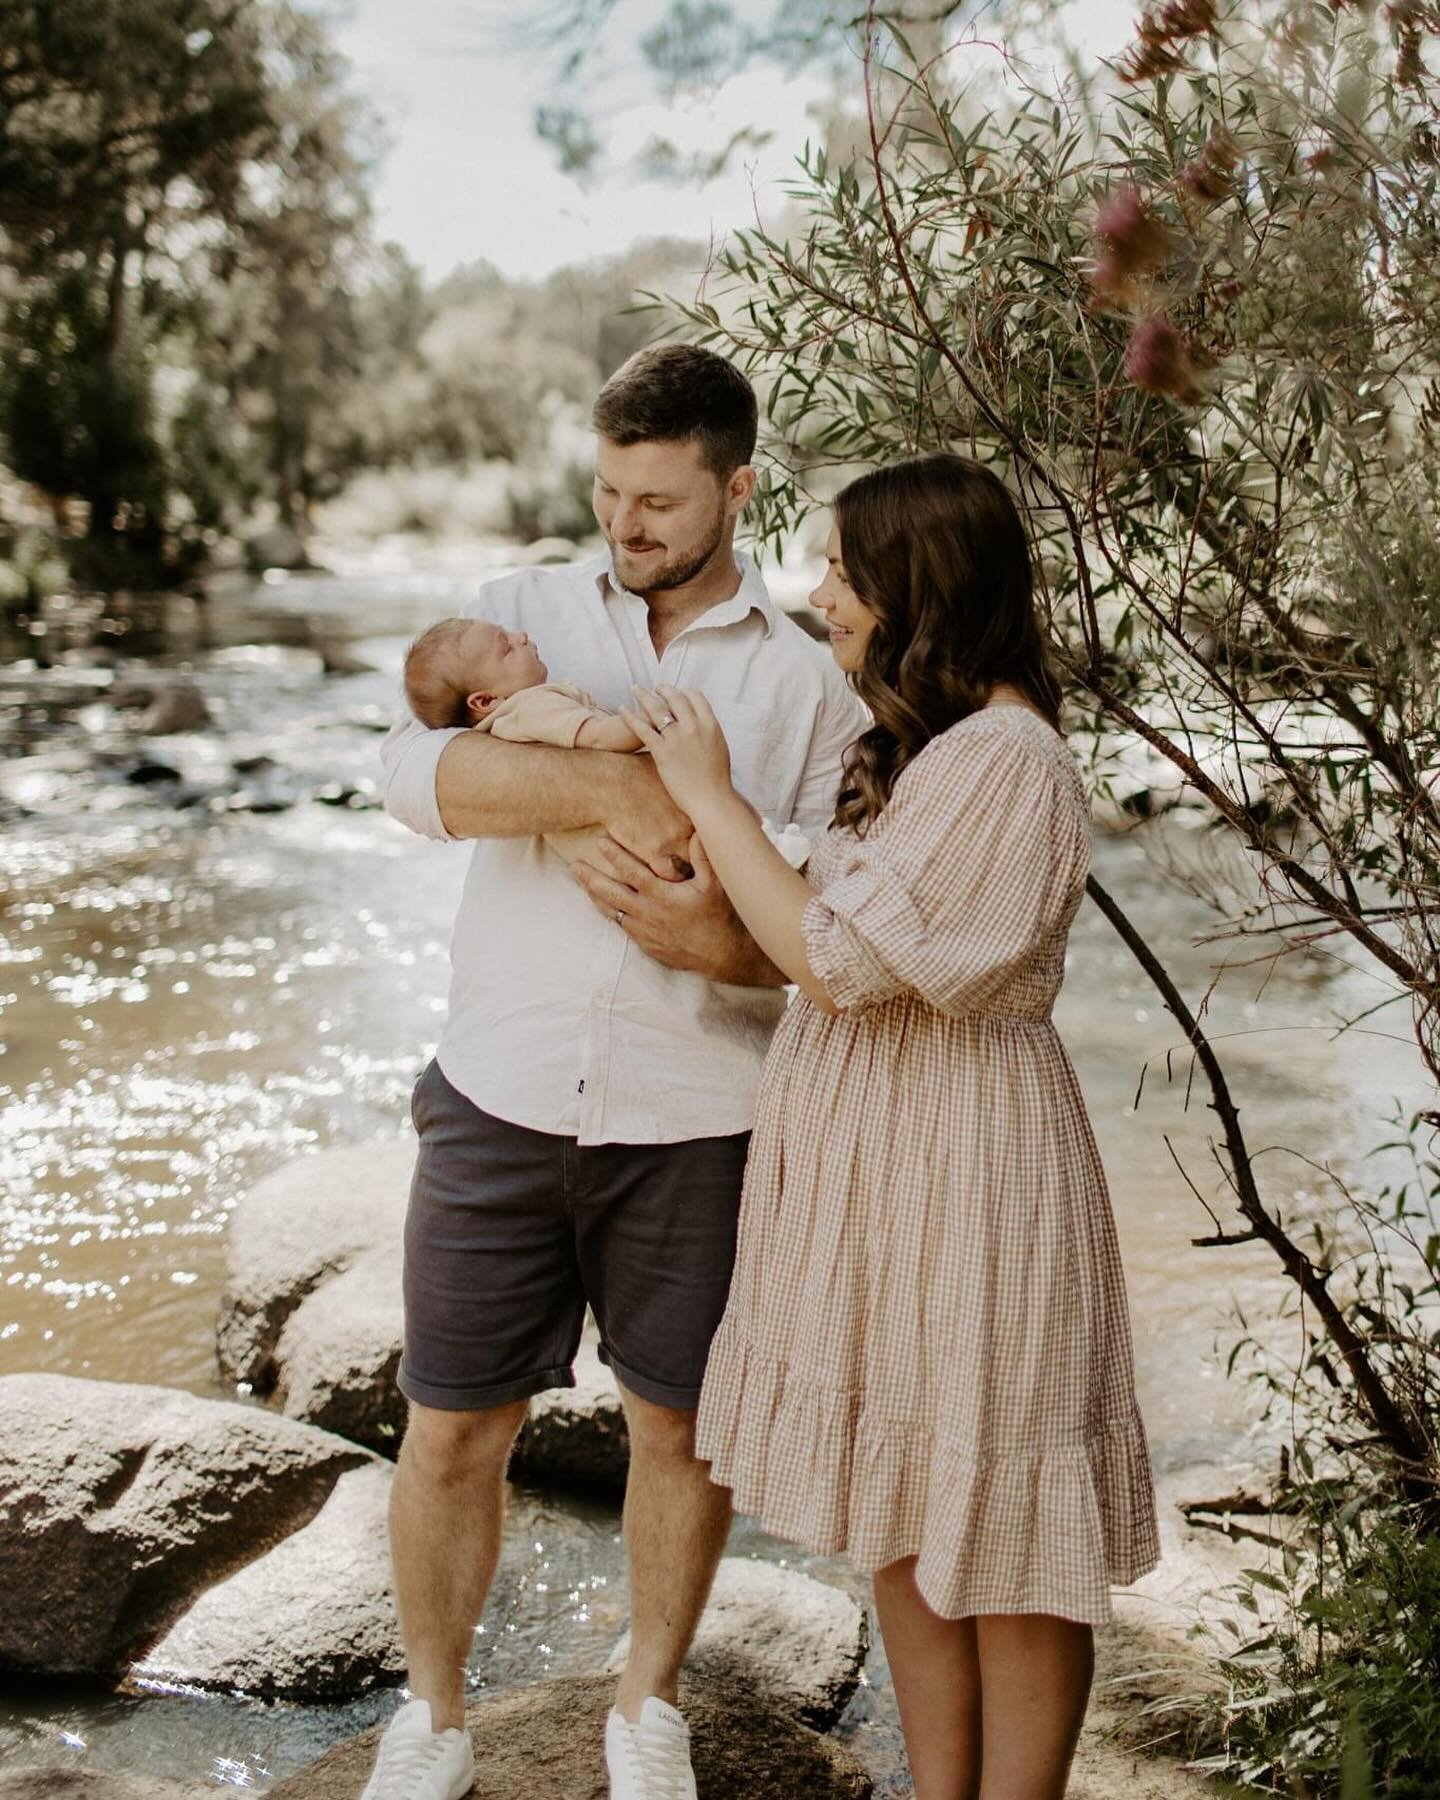 Newborn sessions by the river. Celebrating new life in the embrace of nature.